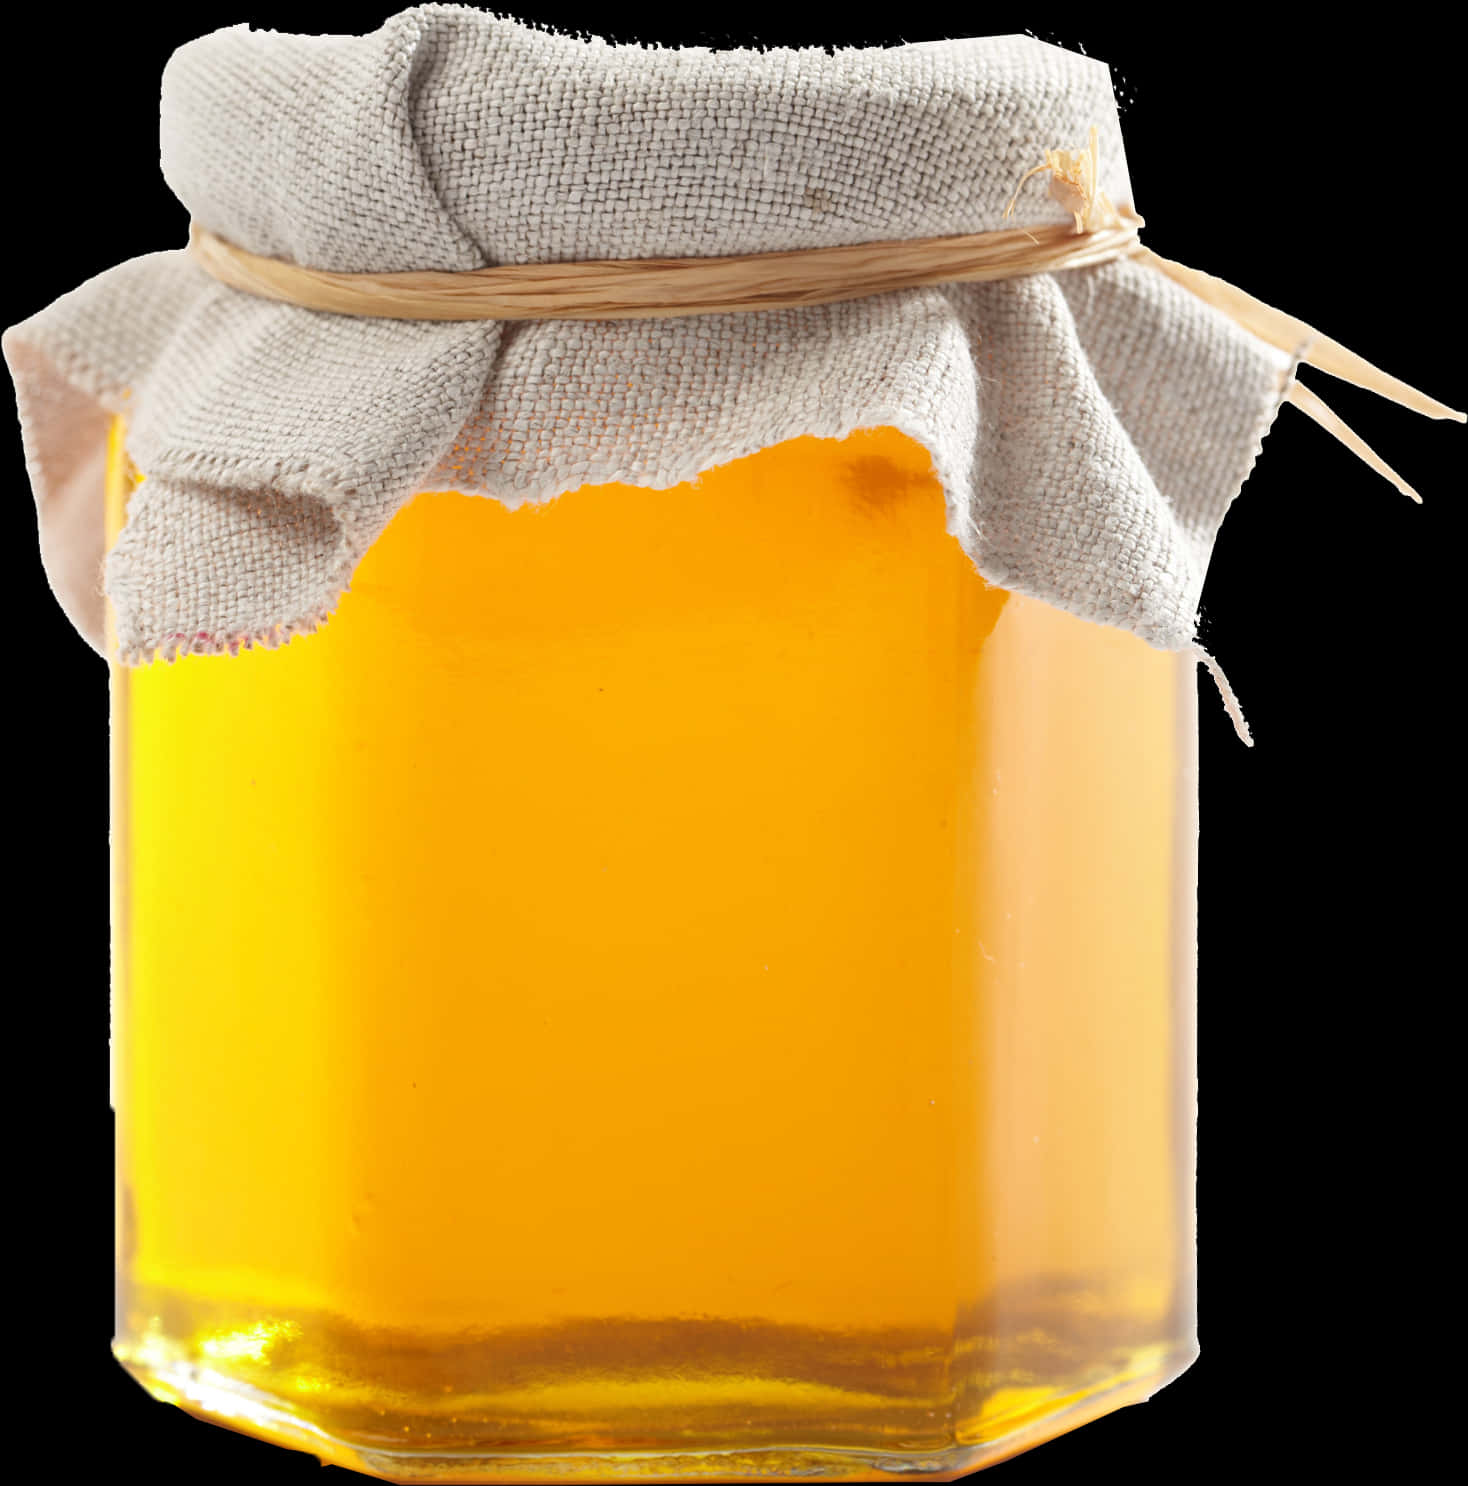 A Jar Of Honey With A Cloth Cover